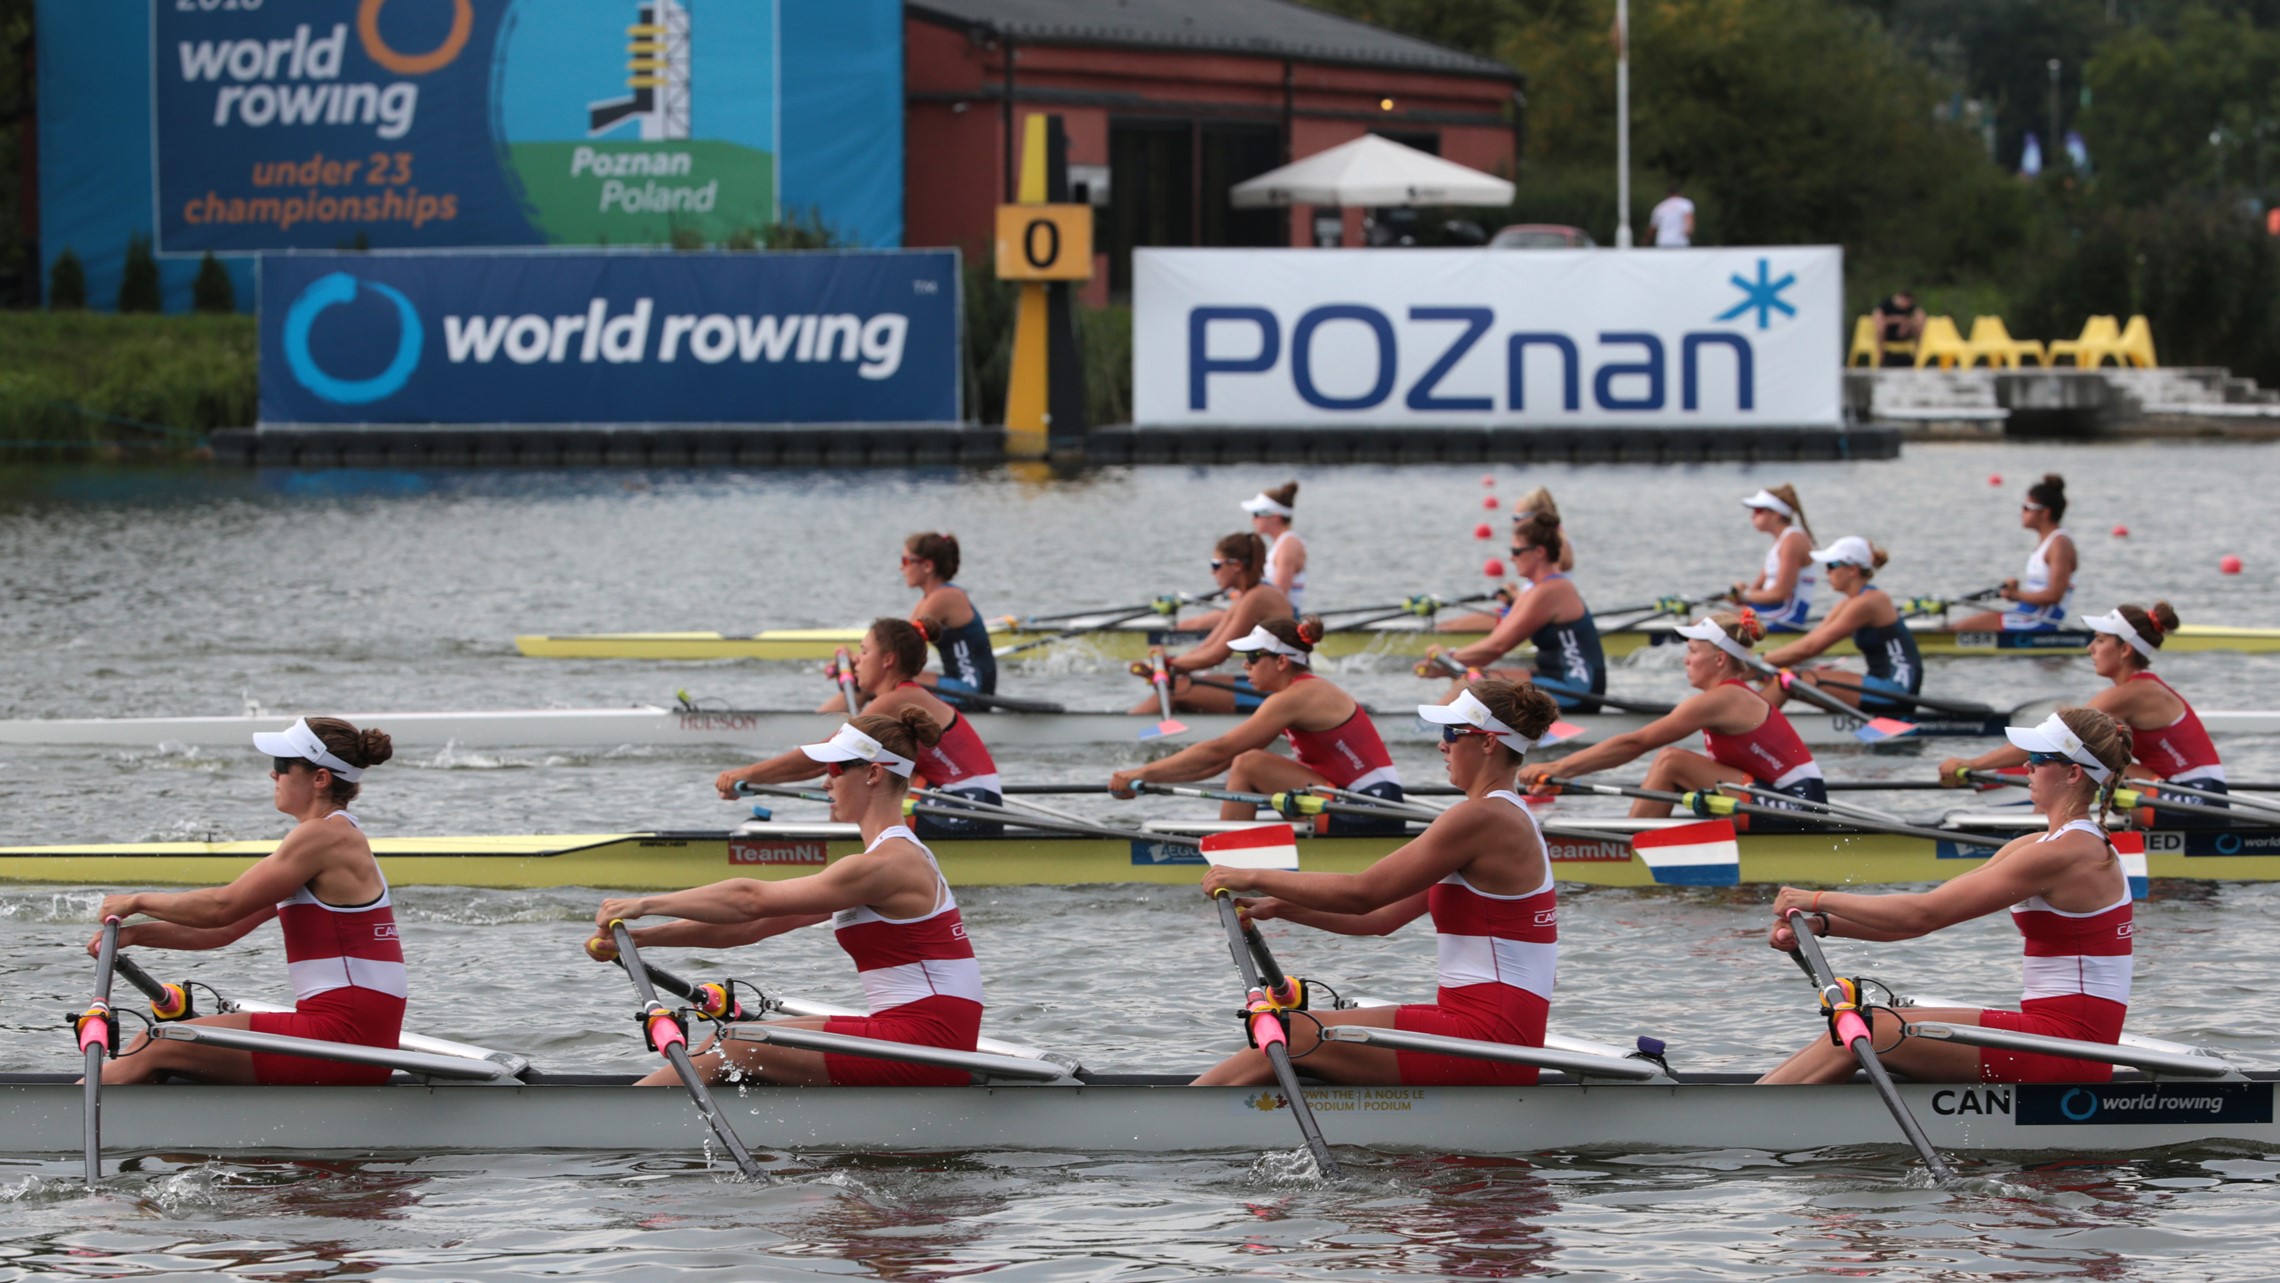 Experiencing and adapting to rowing through COVID - World Rowing